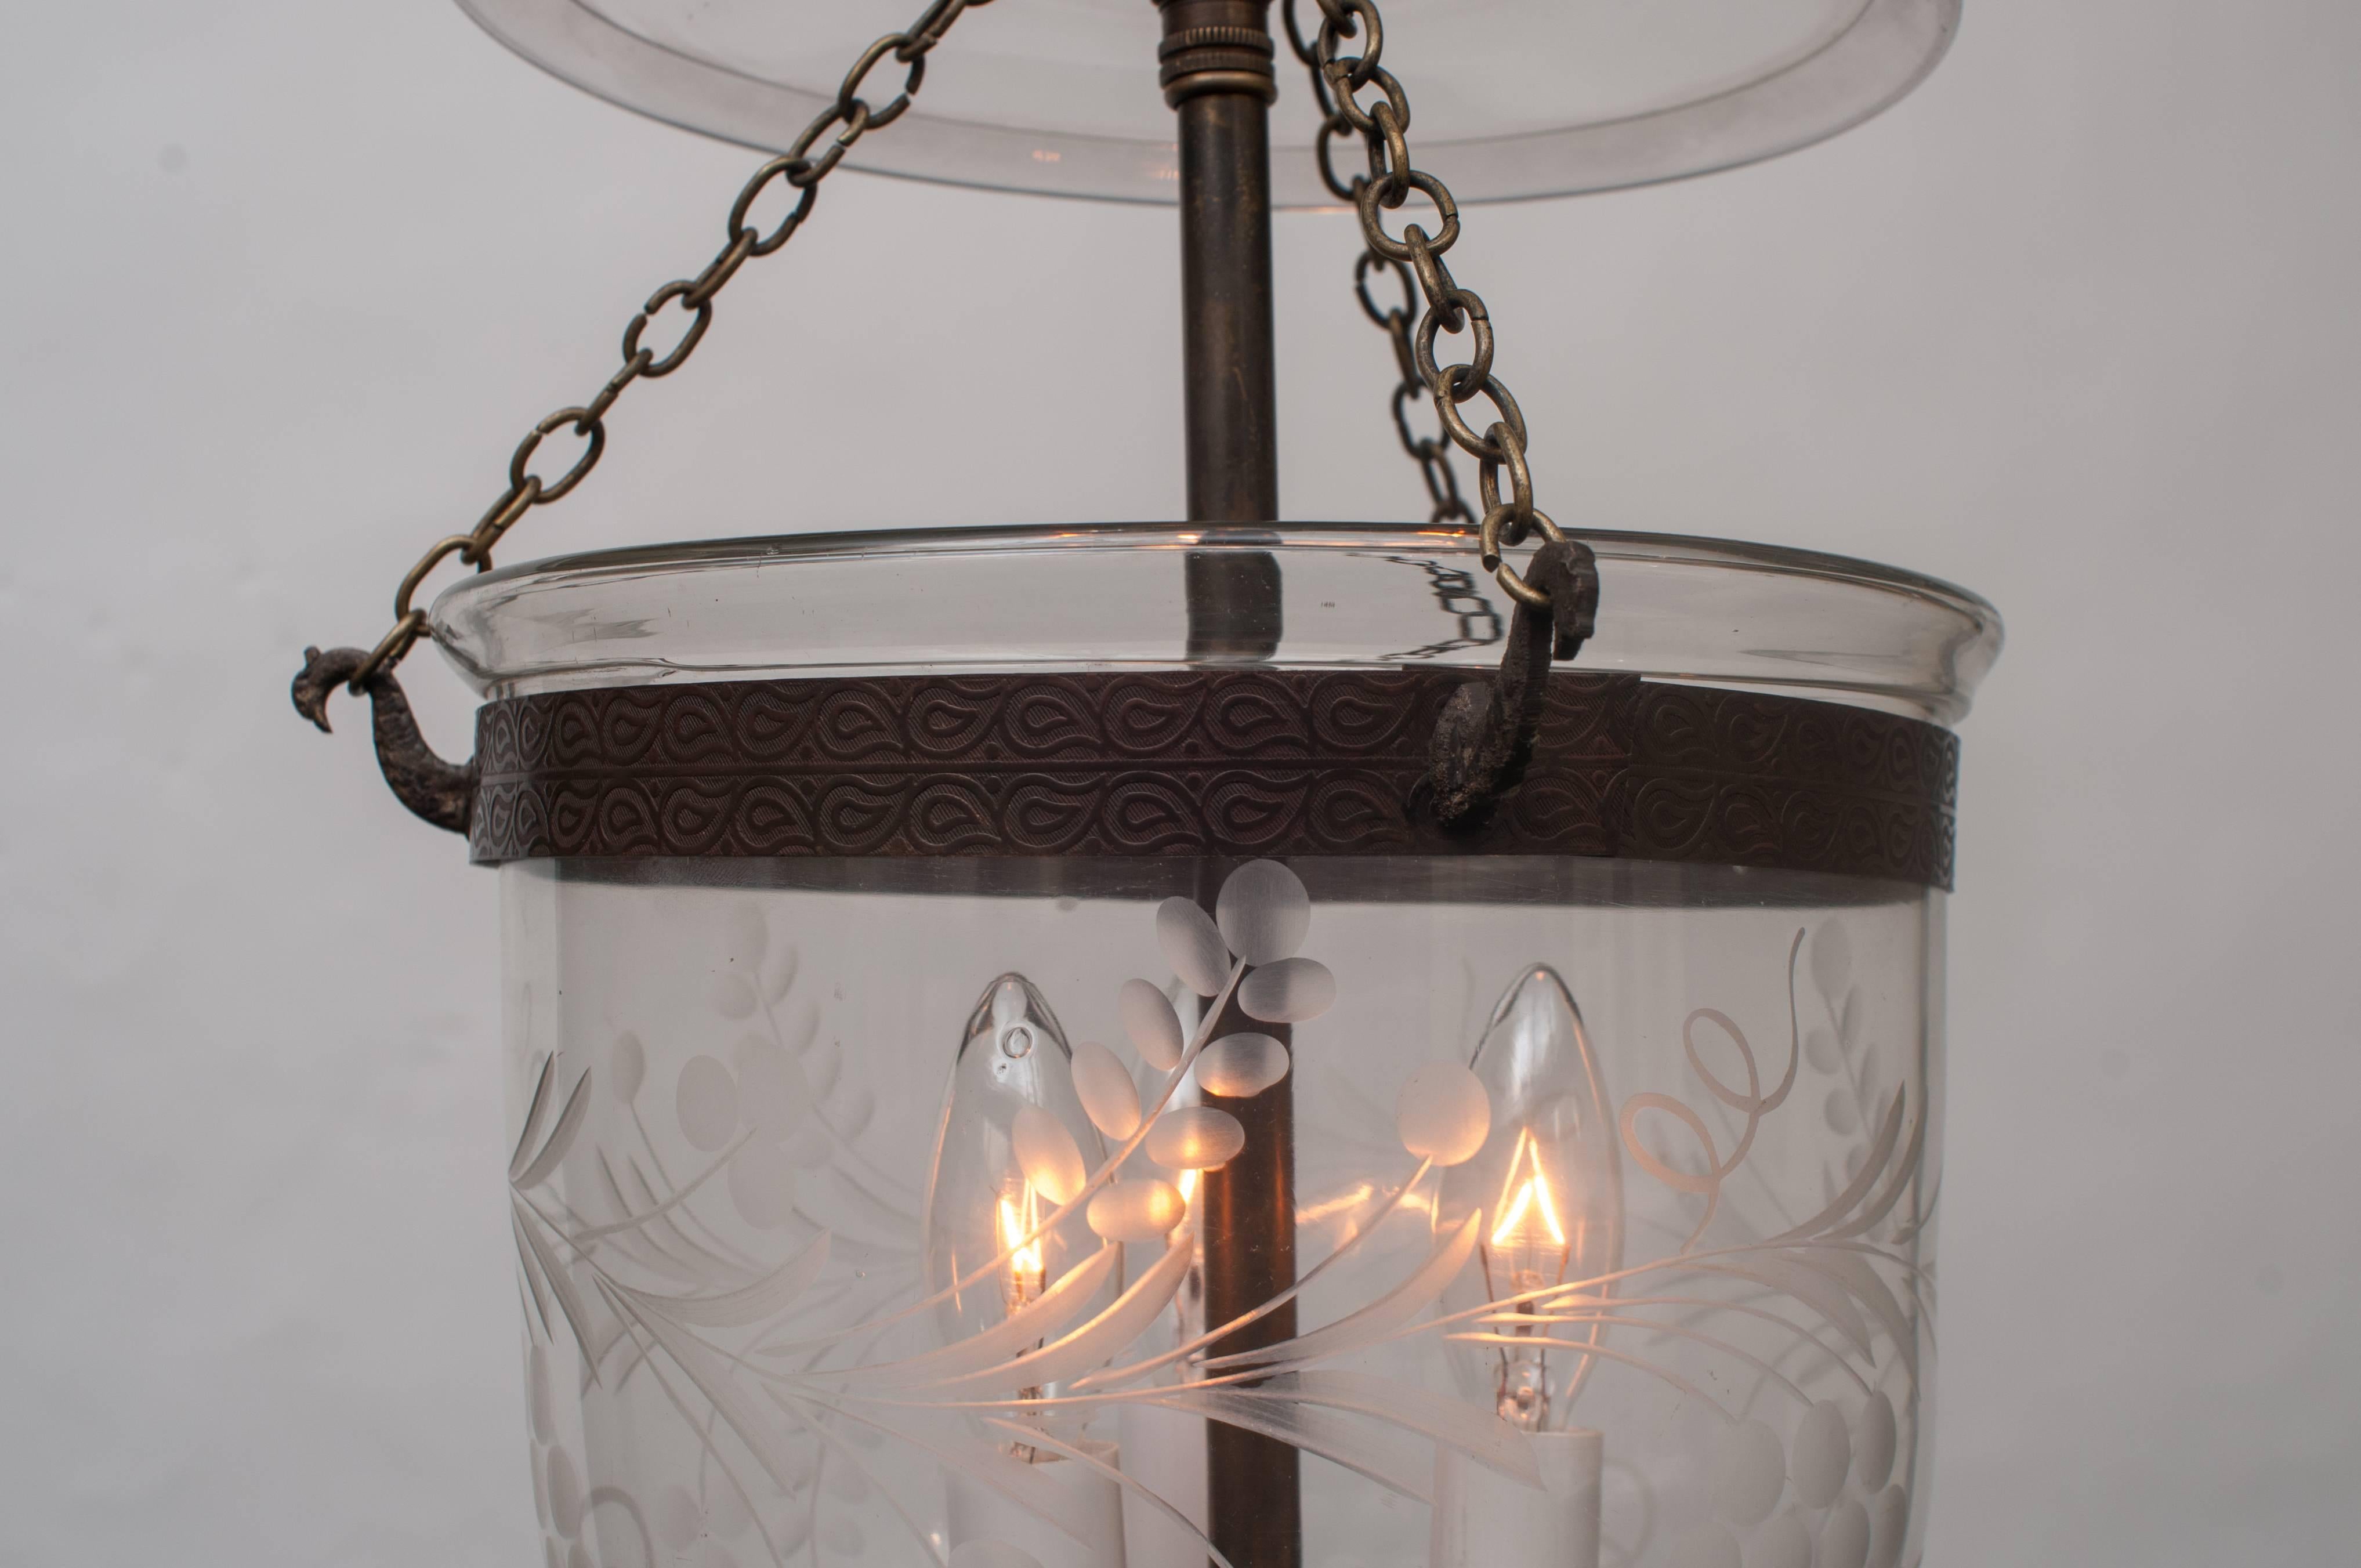 Handblown with glass pontil, original brass ring, three lights and height can be adjusted. Ceiling cap, chain, and hanging hardware included. Free installation within the Washington metro area, subject to some caveats.